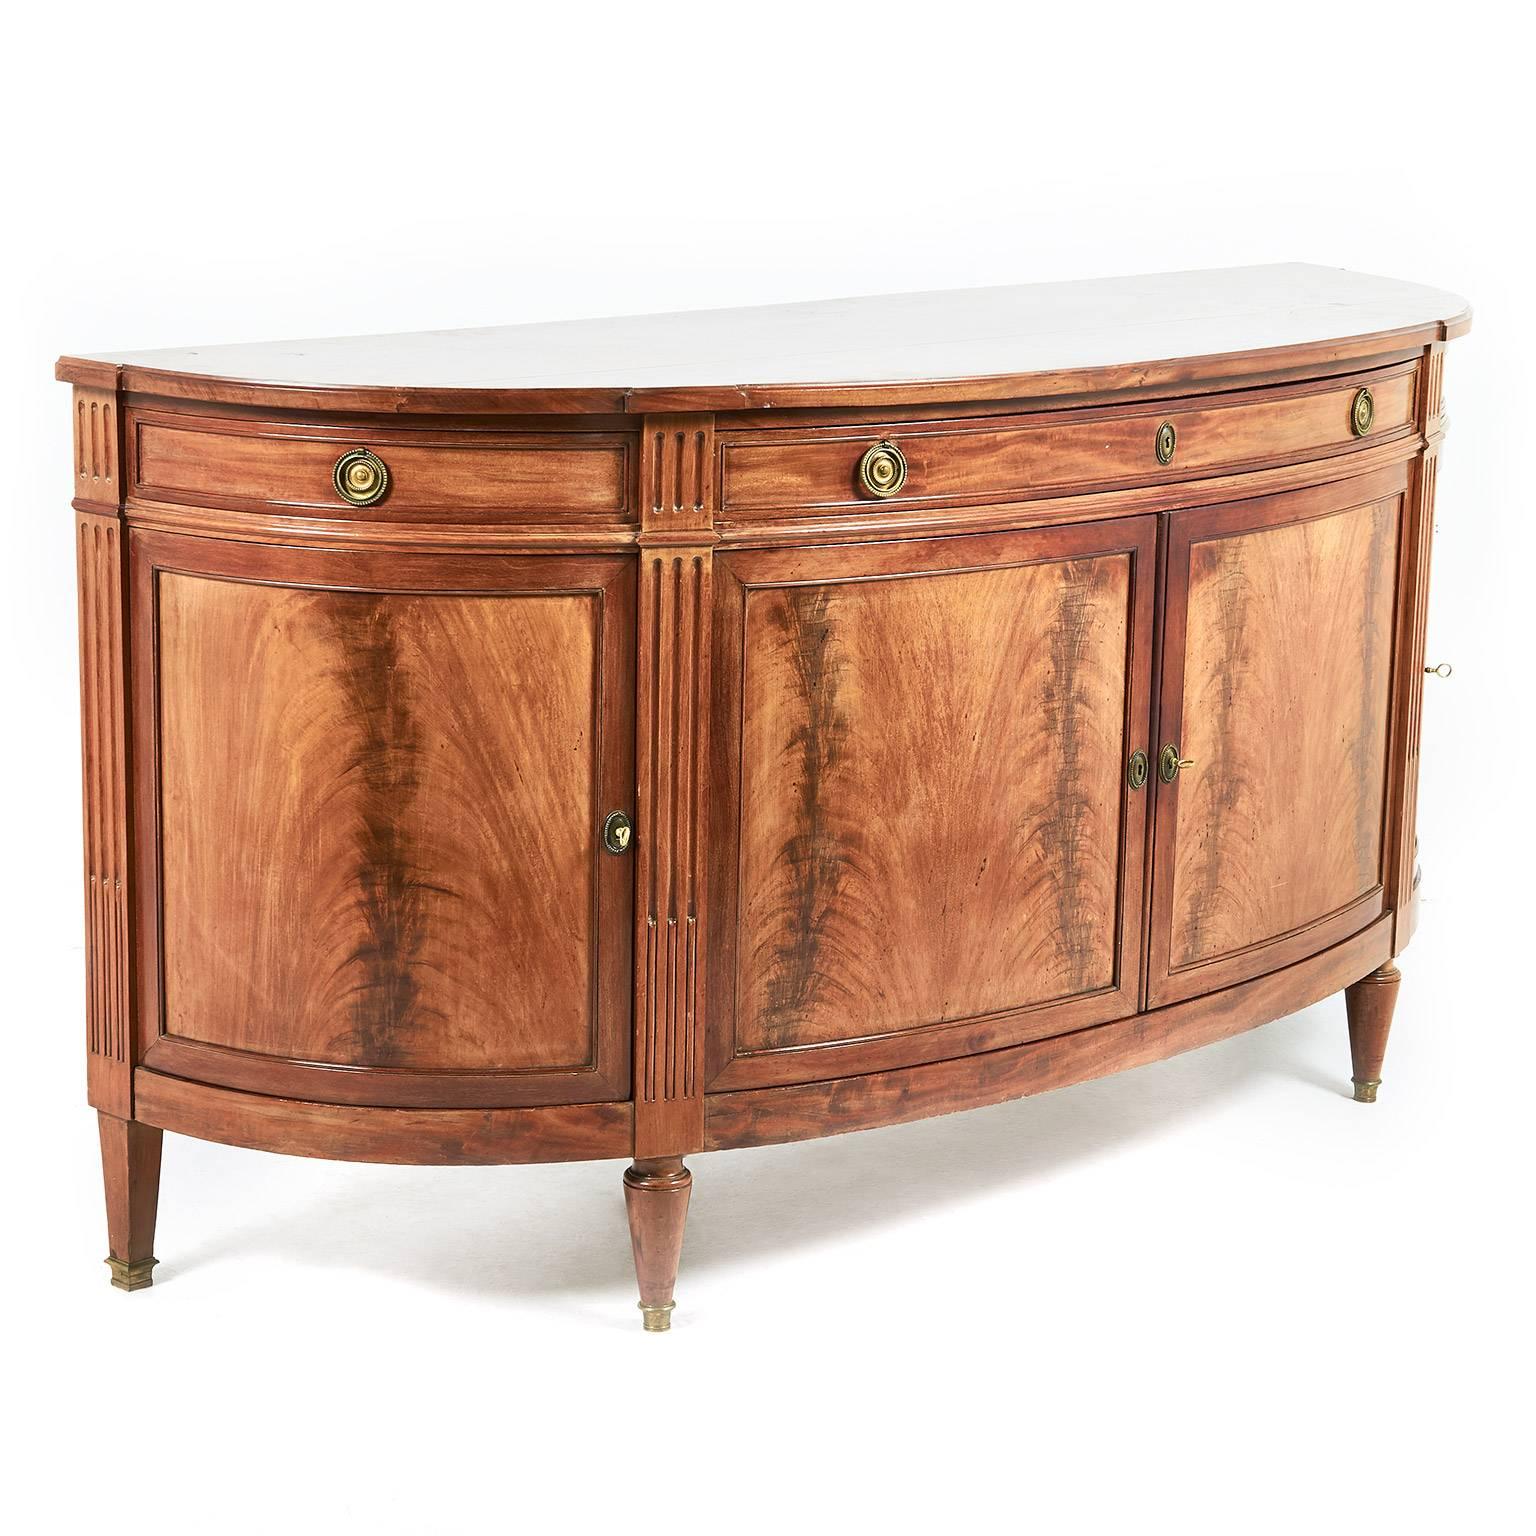 Marquetry Antique French Demilune Sideboard in Mahogany, FY-934